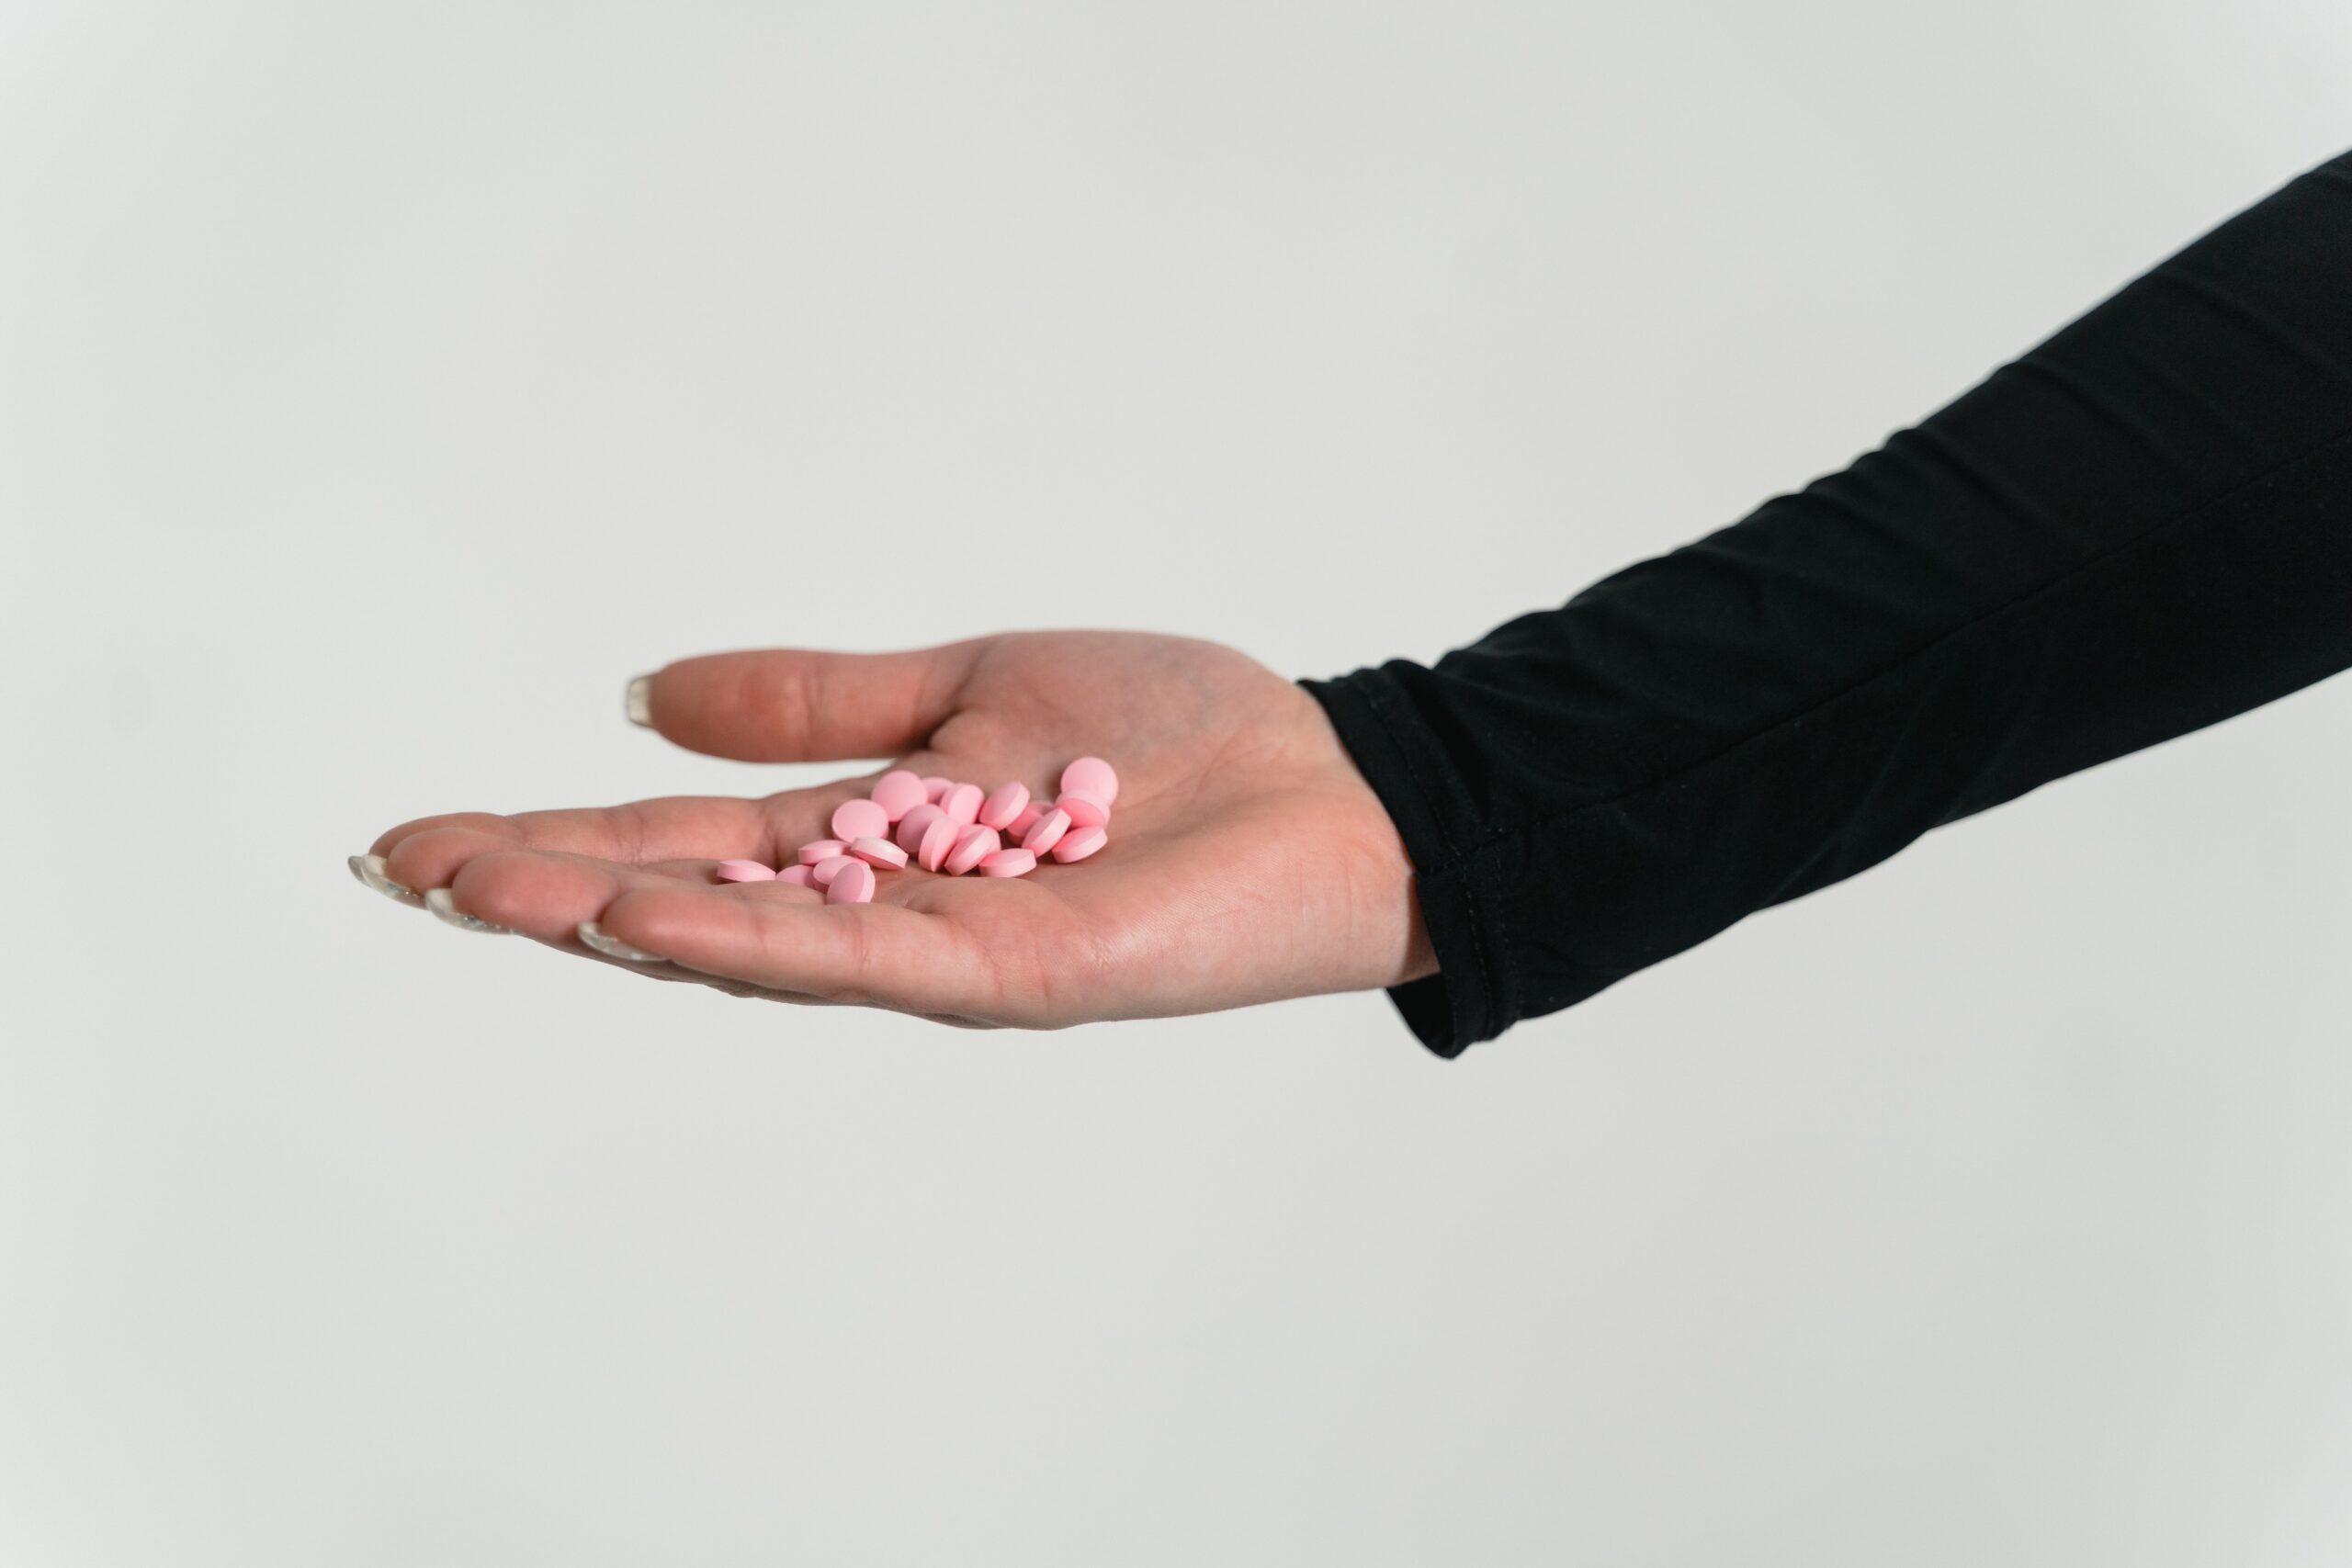 A person with a handful of pills